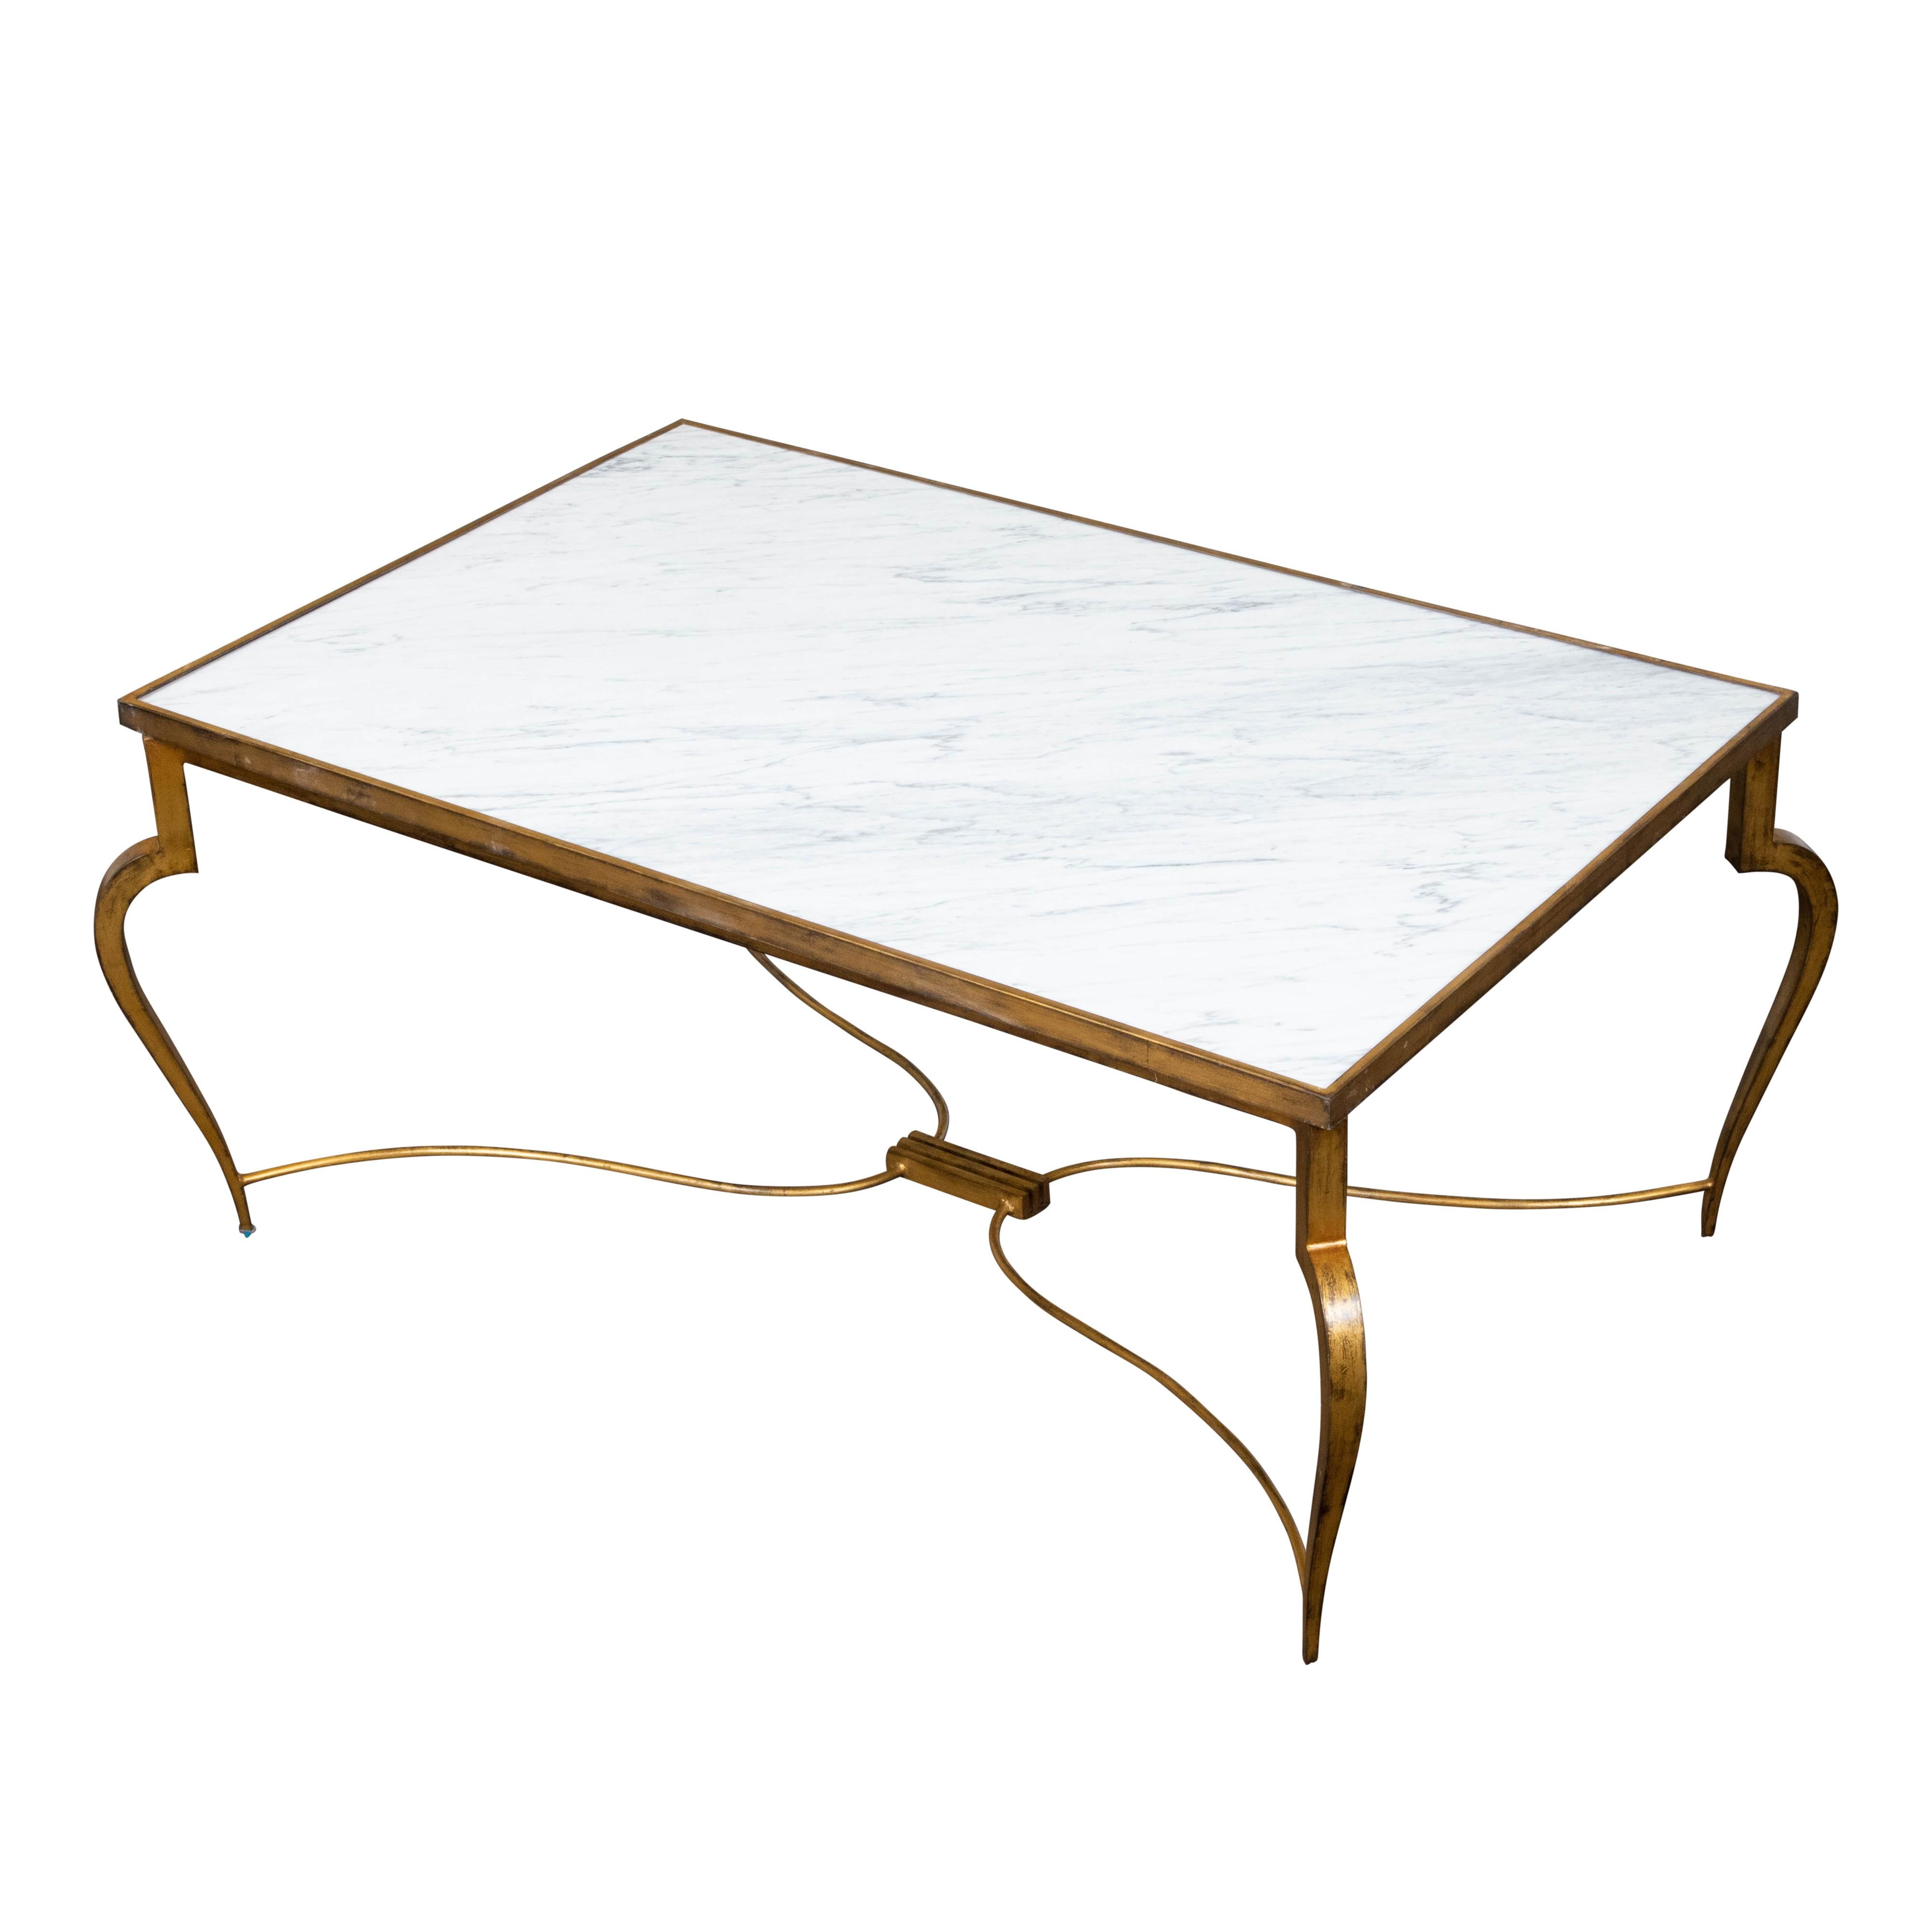 French Midcentury Gilt Iron Coffee Table with White Marble Top and Cabriole Legs For Sale 2